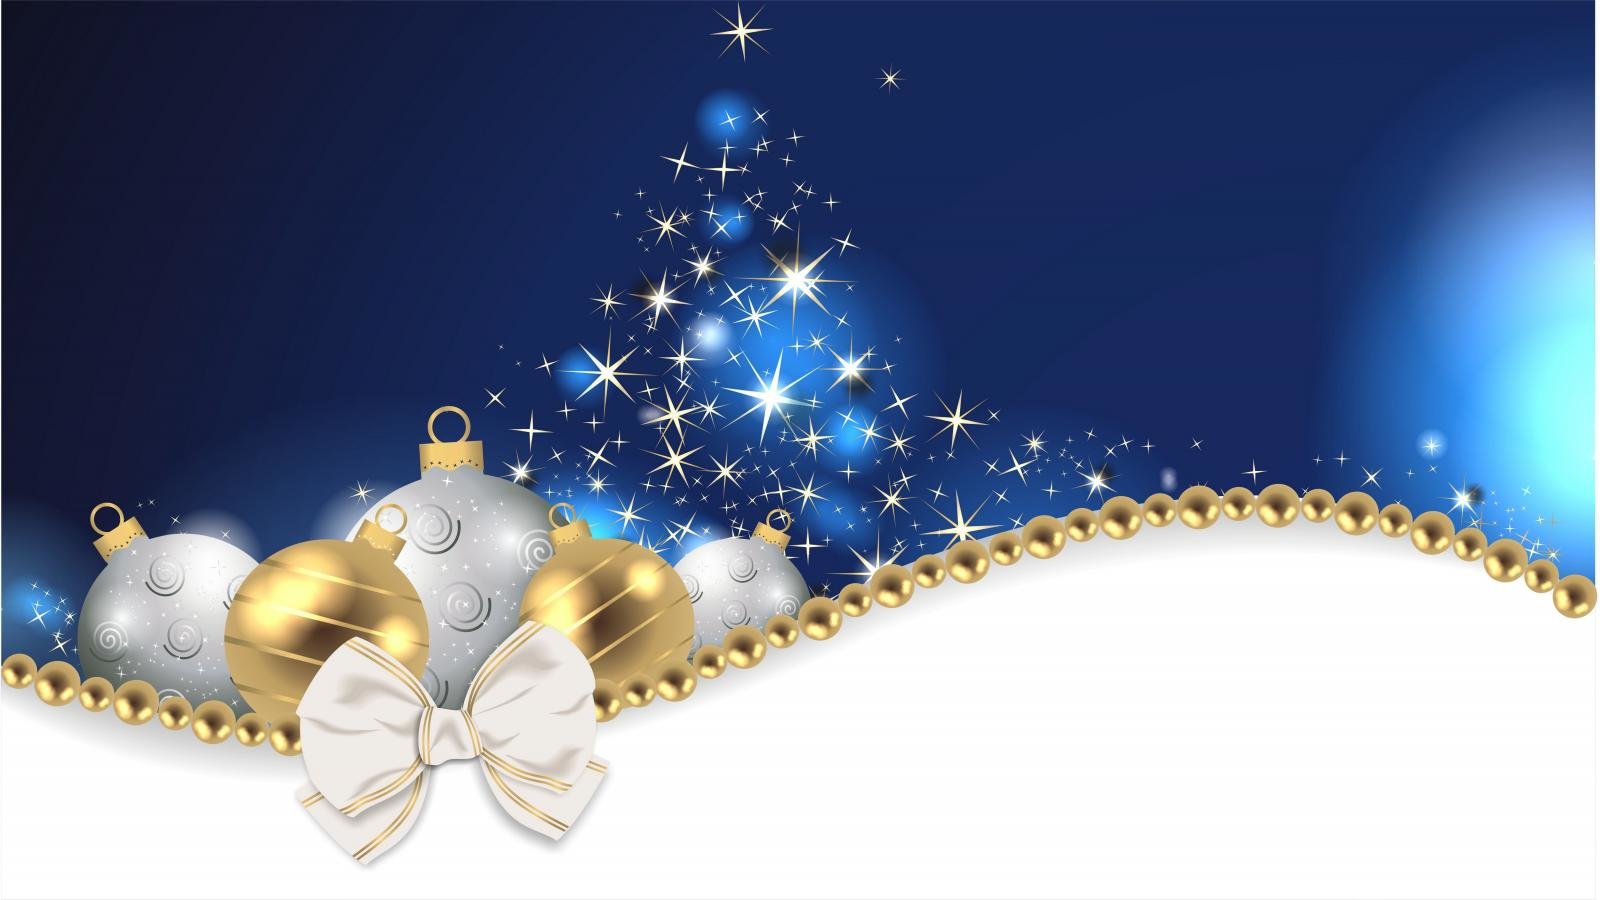 Free download Awesome Christmas wallpaper ID435465 for HD 1600x900 PC [1600x900] for your Desktop, Mobile & Tablet. Explore Christmas Free Wallpaper. Free 3D Christmas Wallpaper, Free Animated Christmas Wallpaper